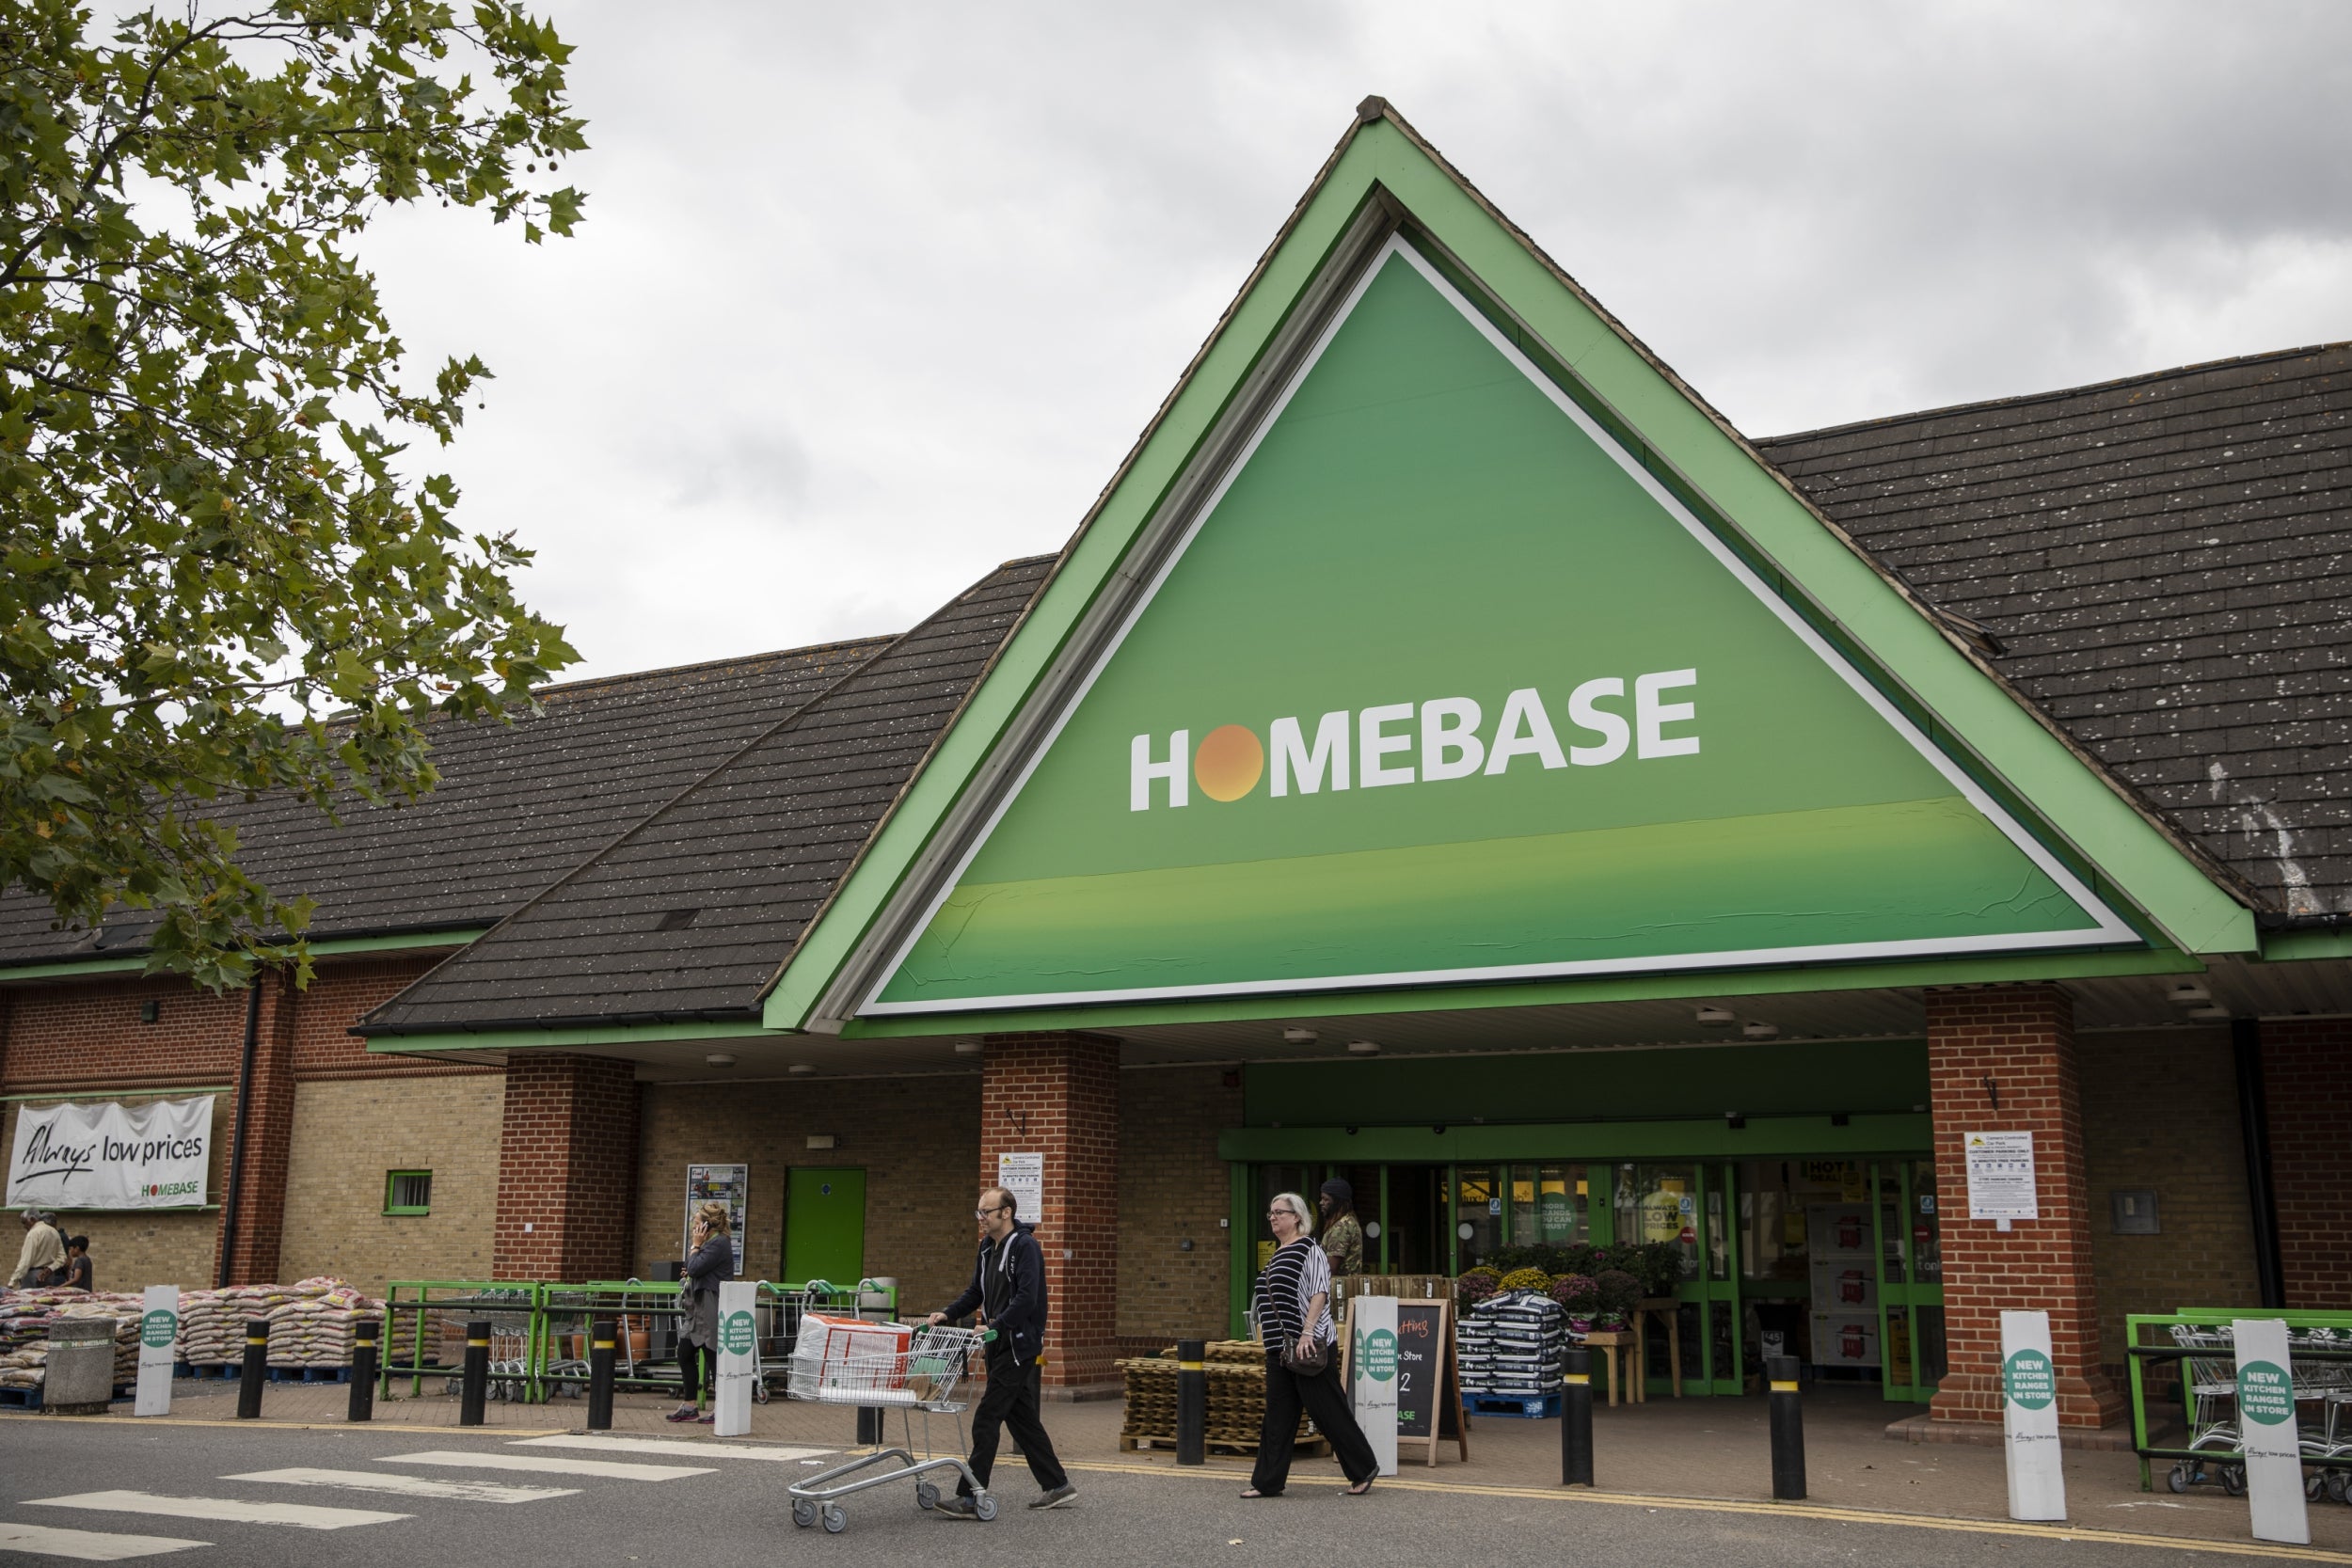 One disgruntled customer told the consumer group that Homebase’s ‘unattractive site is not very clear’